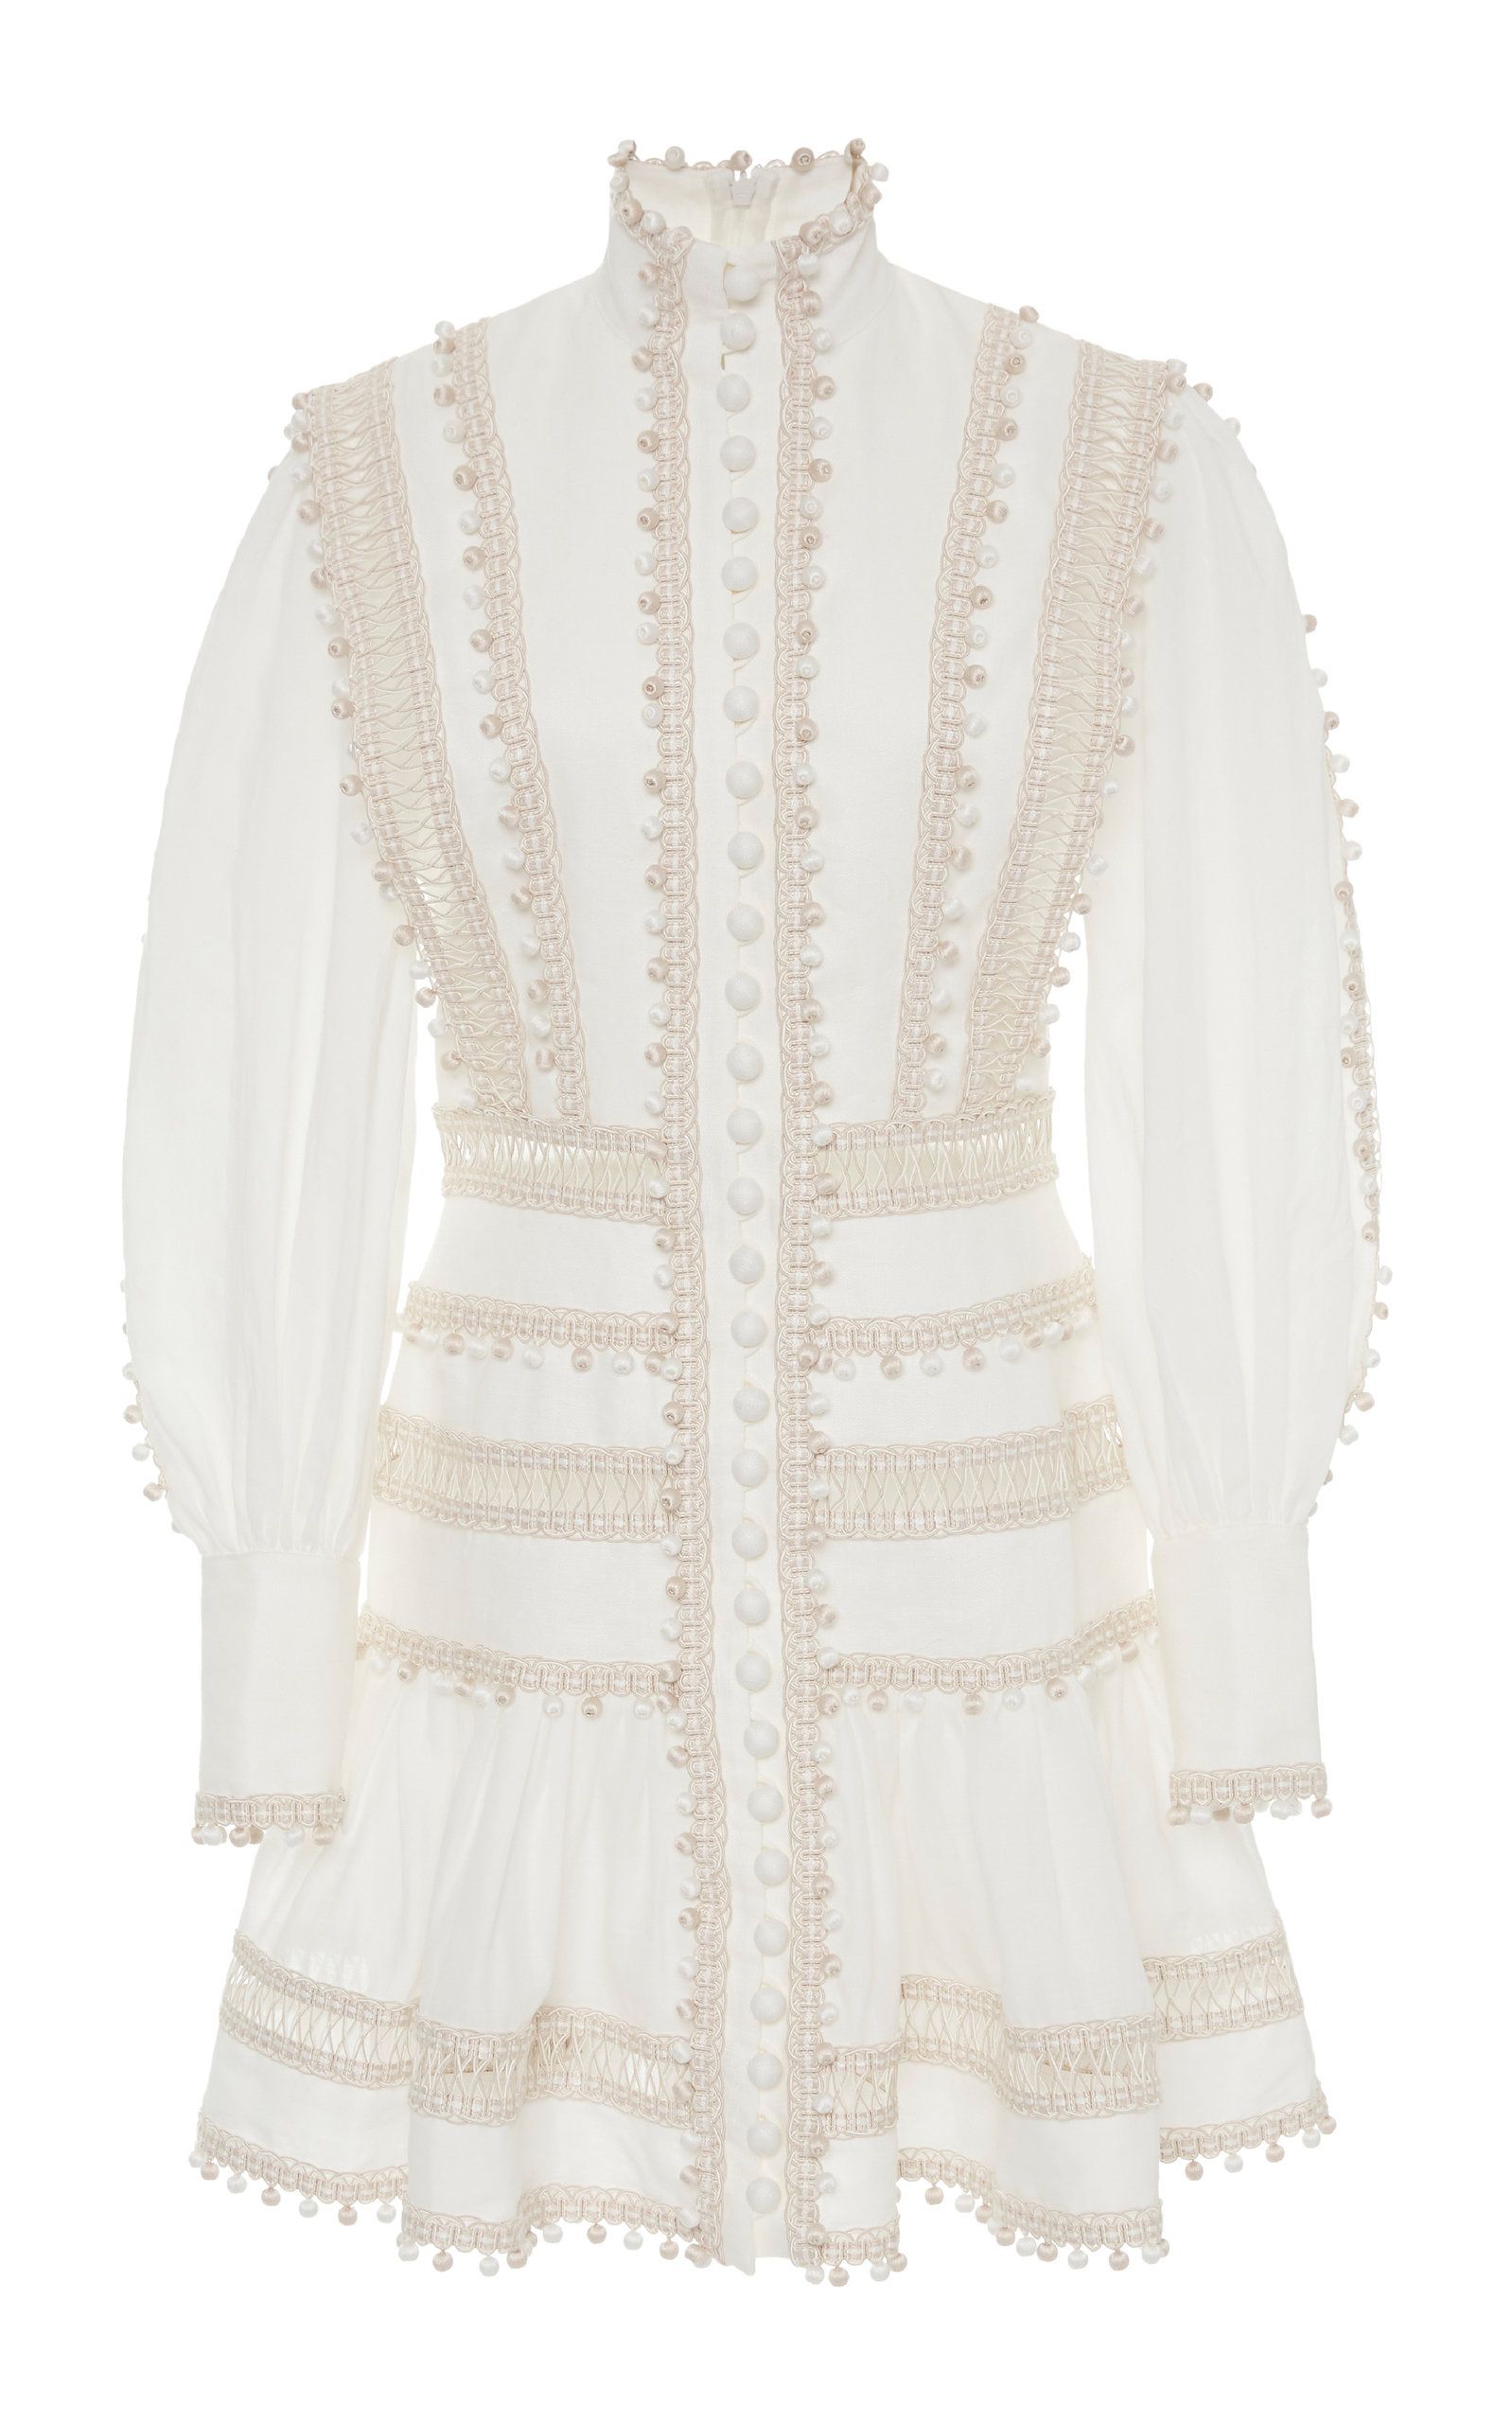 https://hips.hearstapps.com/vader-prod.s3.amazonaws.com/1590600023-large_zimmermann-white-embroidered-button-detailed-mini-dress.jpg?crop=1xw:1xh;center,top